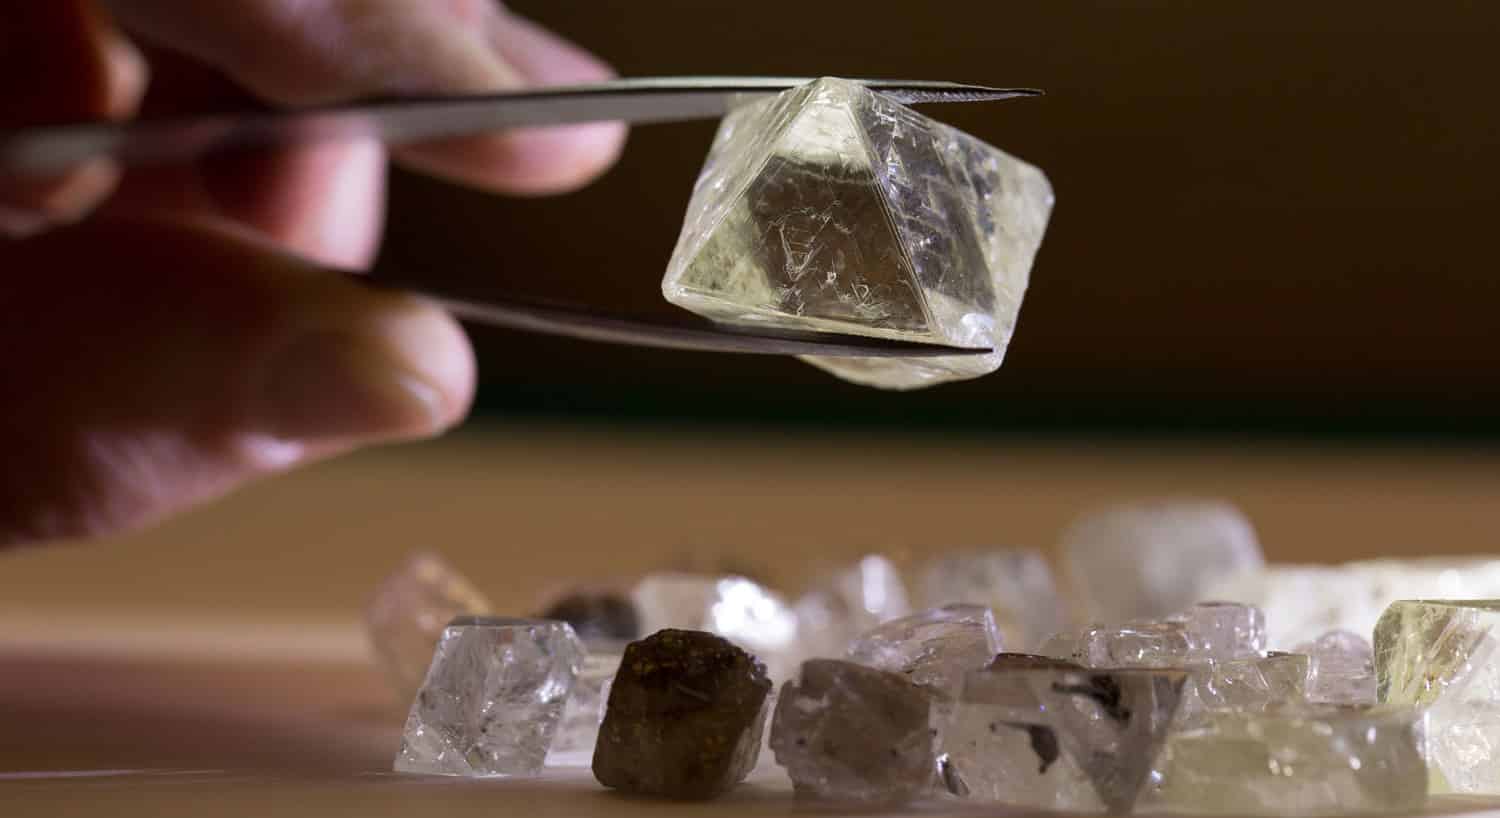 De Beers Sightholders Reject 25 percent of Goods – The Diamond